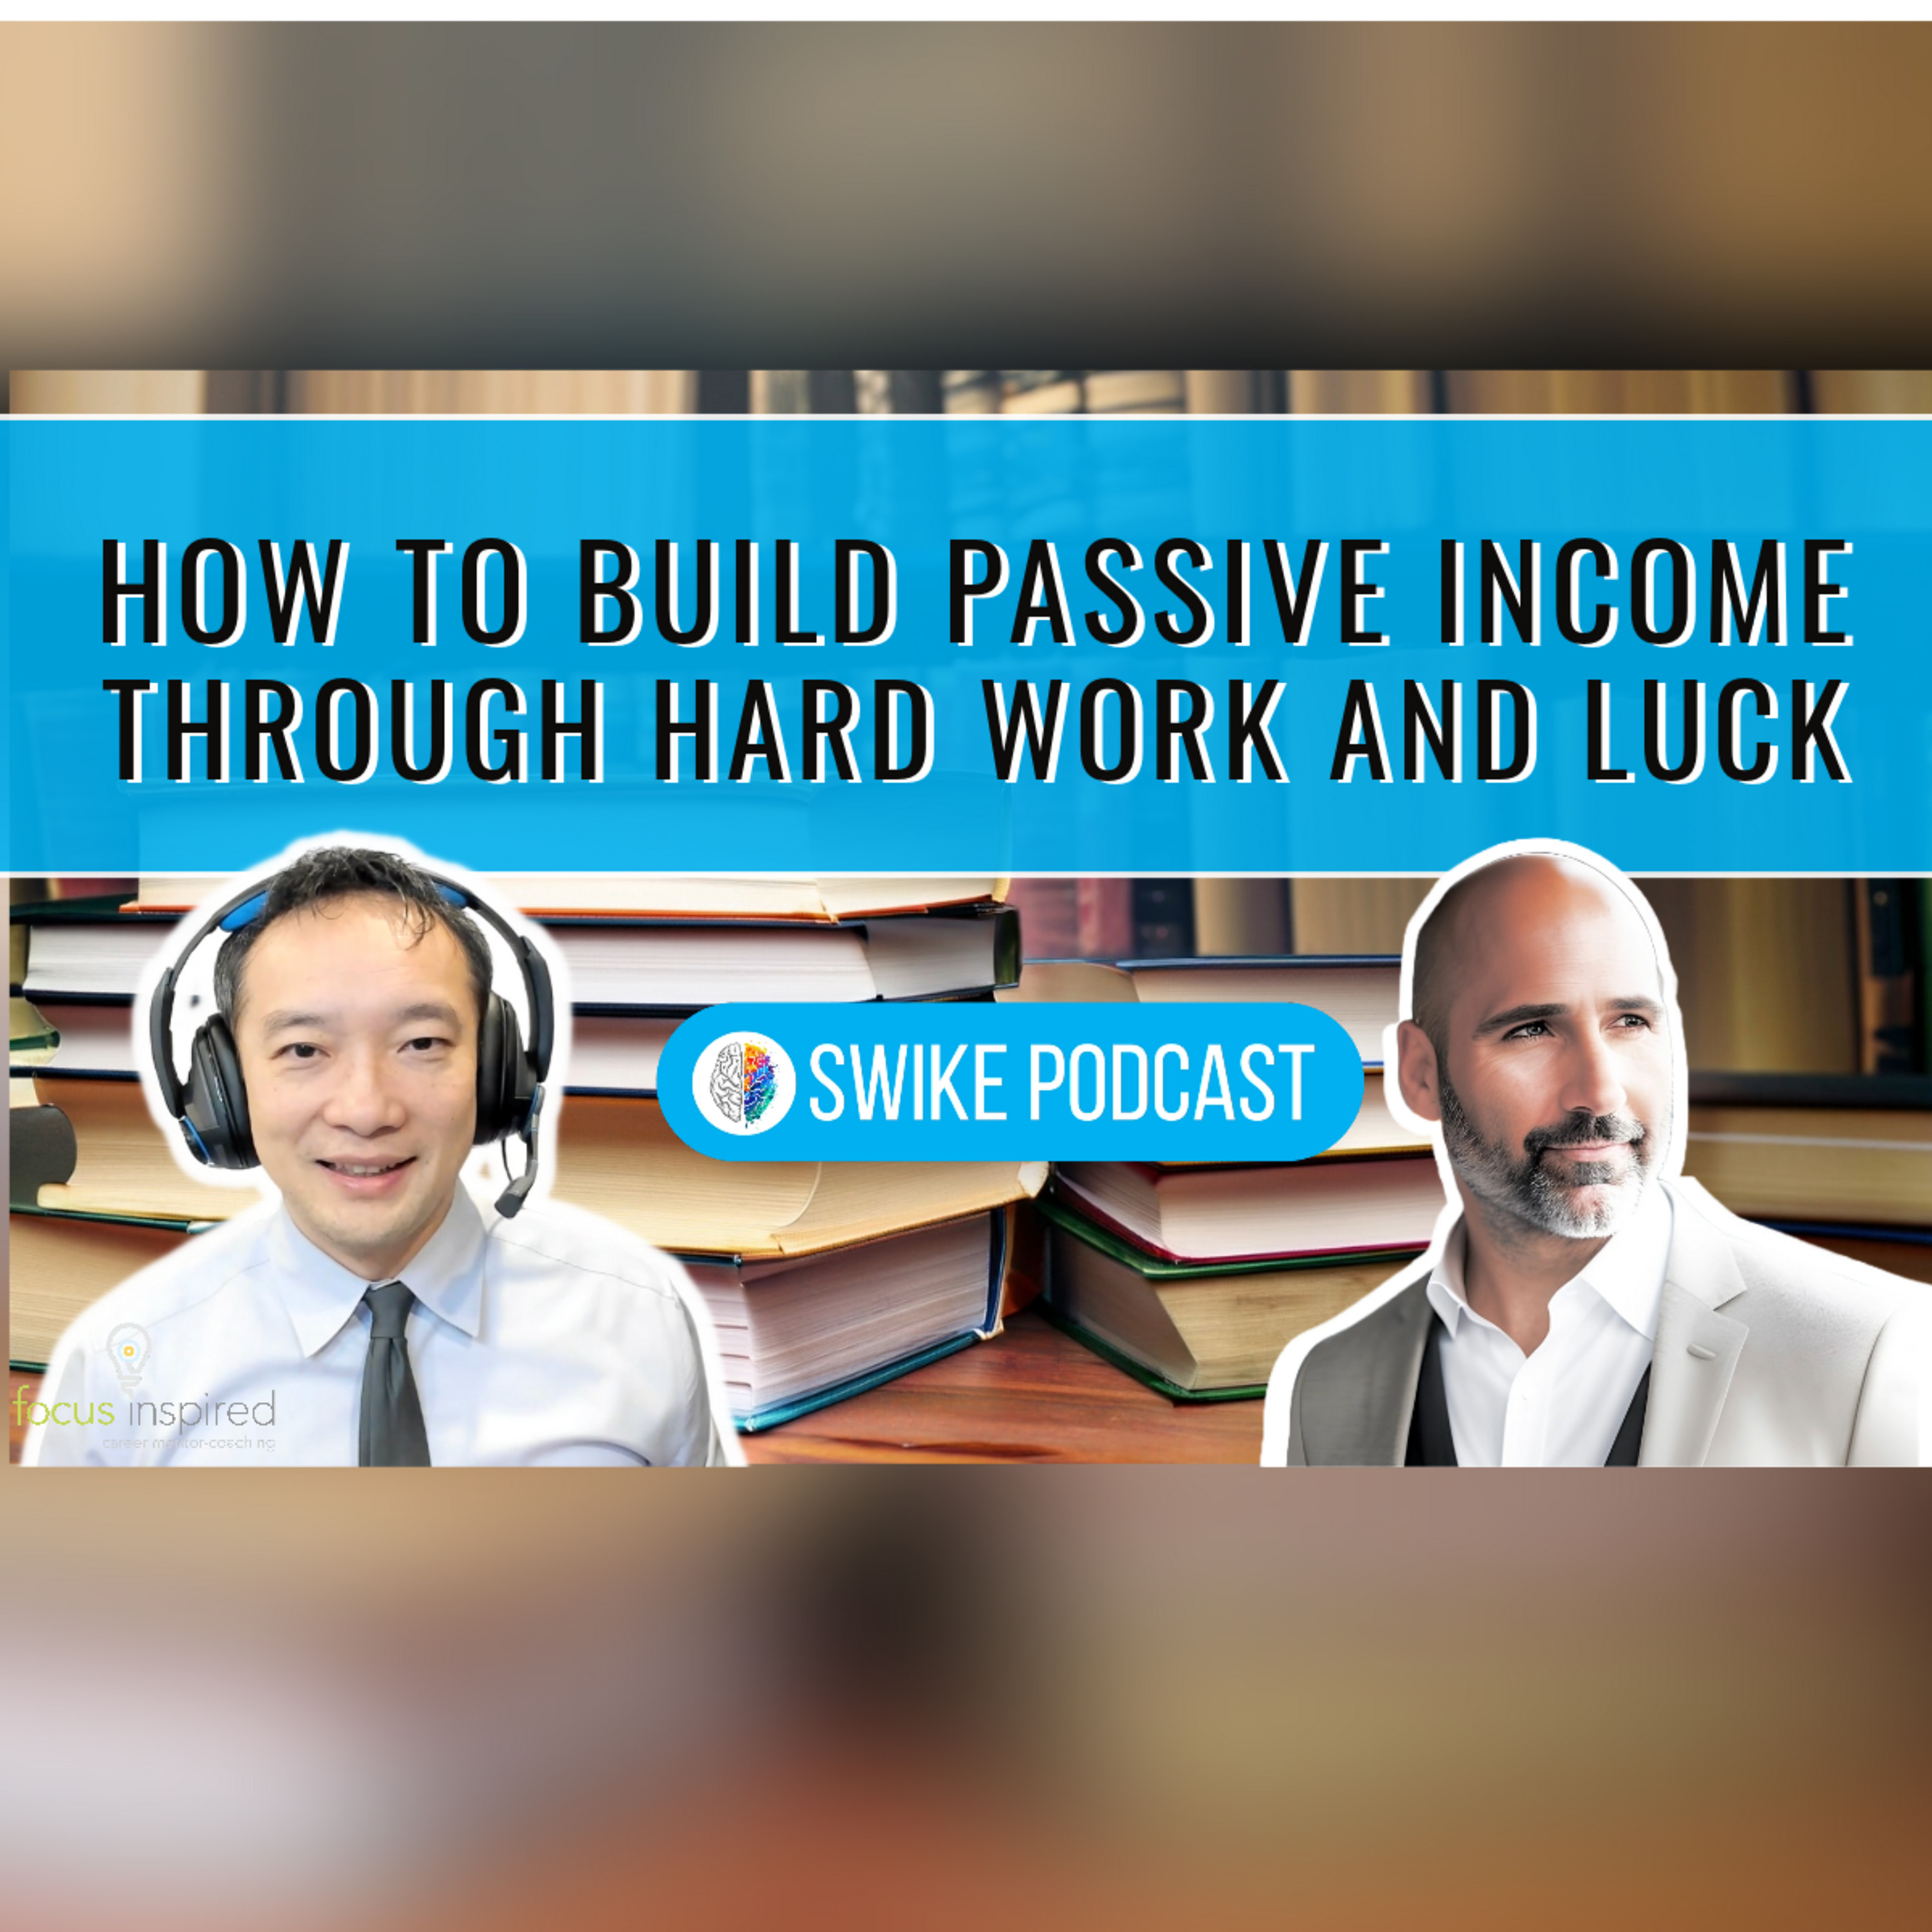 How to build passive income through hard work and luck | SIWIKE Podcast | Domenic Salerno (DSAL-001)